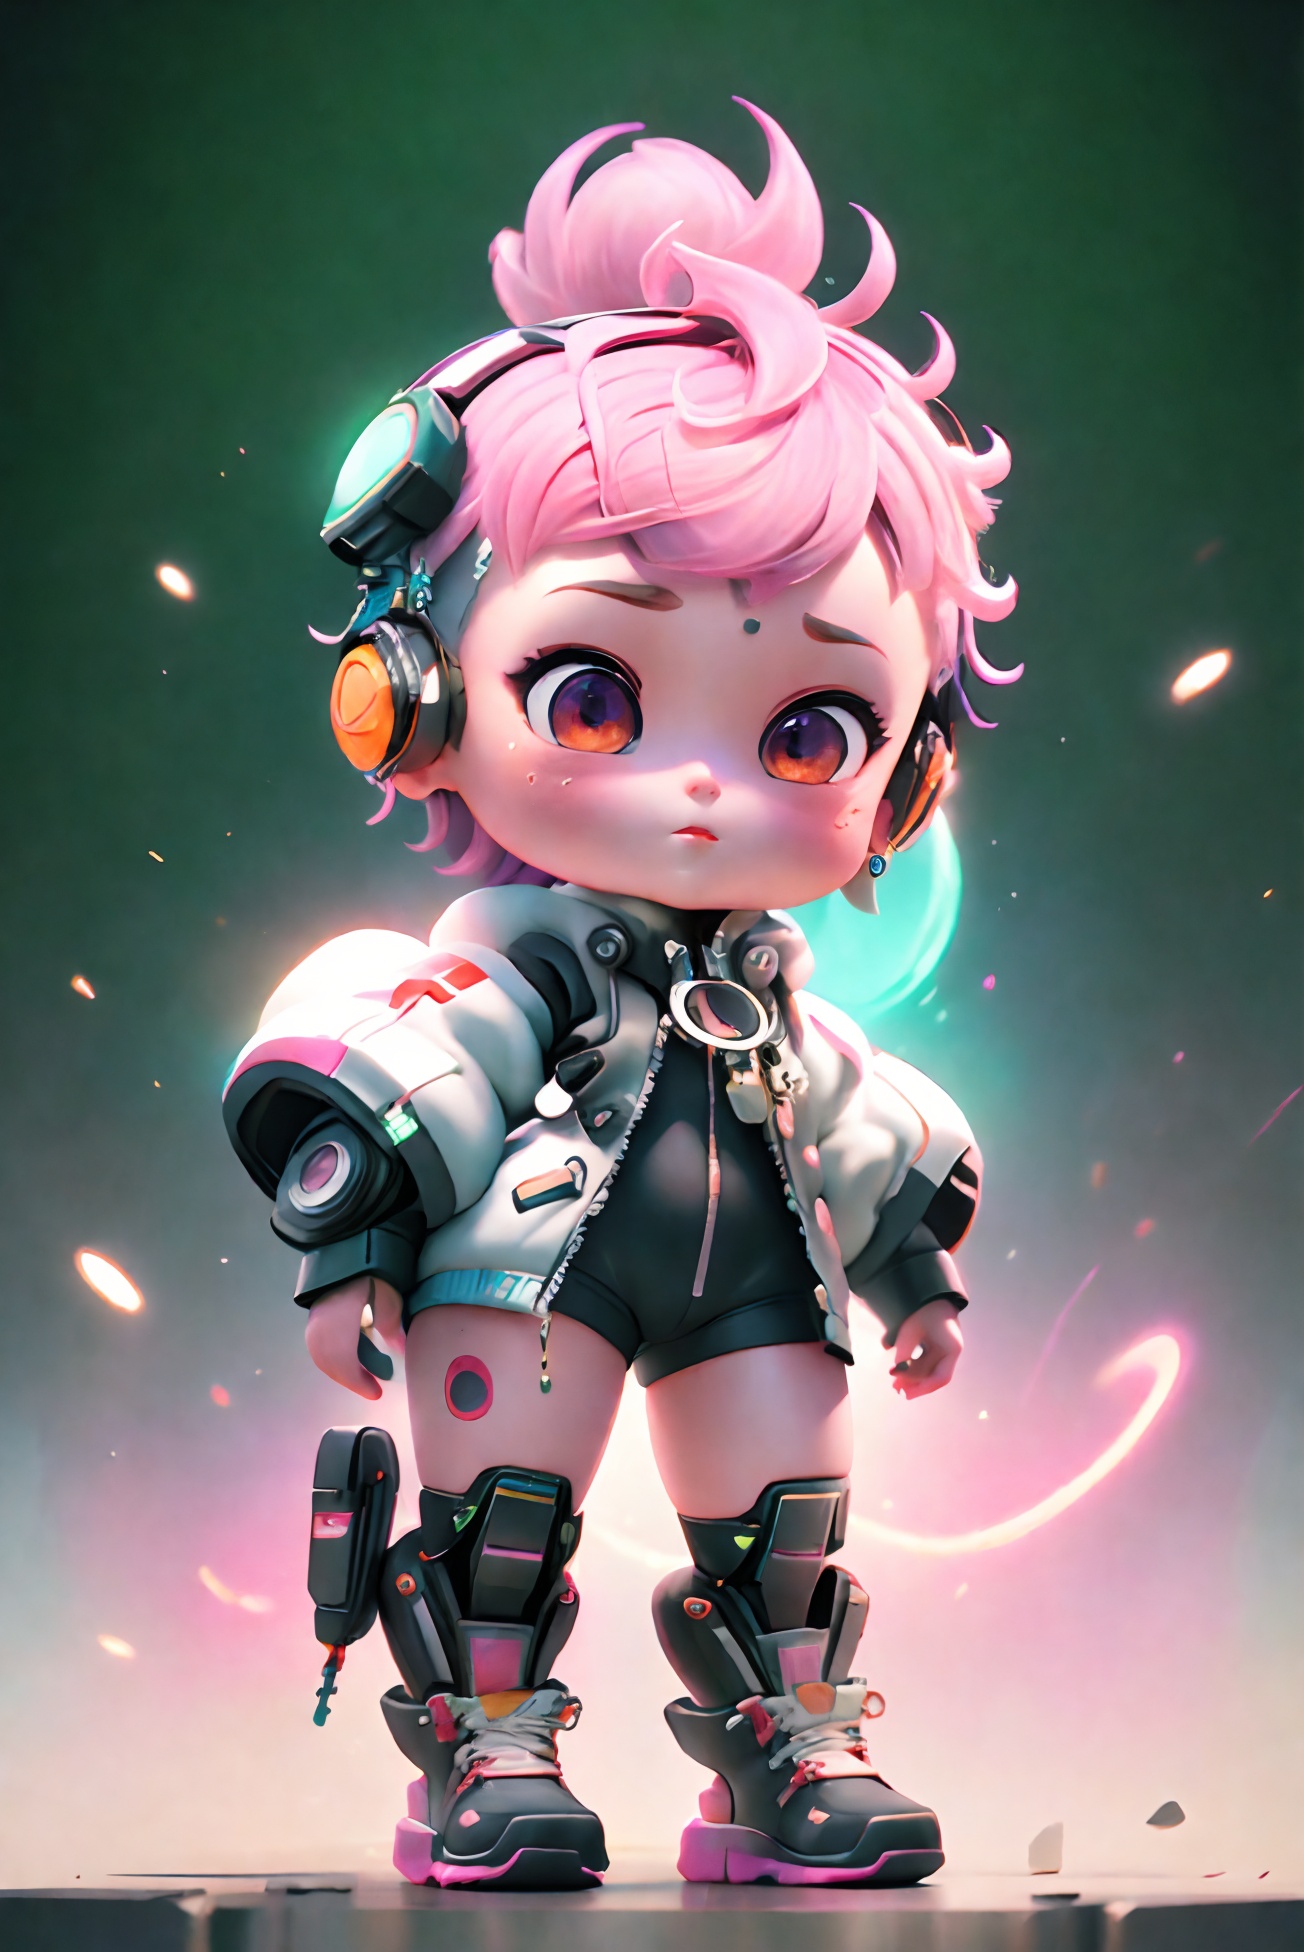 Anime Artwork Lucy (Cyberpunk), Pink Short Hair, Pink Eyes, Red Lips, (Front), (Full Body), Bodysuit, Punk Stud Earrings, Bossy, Brave, Key Visual, Vibrant, High Detail, Illustration, Short Straight Hair, Futurism, NFT Art, Solid Color Background, Robotic Arm, Cartoon Coloring, Tendal Effect. Non-Realistic Rendering Transparency, Color Tilt, Animation, Blender Geometry Art, Intrlligence 4k Image, Epic, Cinematic Effects, Neon Cold Pounding, Octane Rendering, OC, 8k, Lida